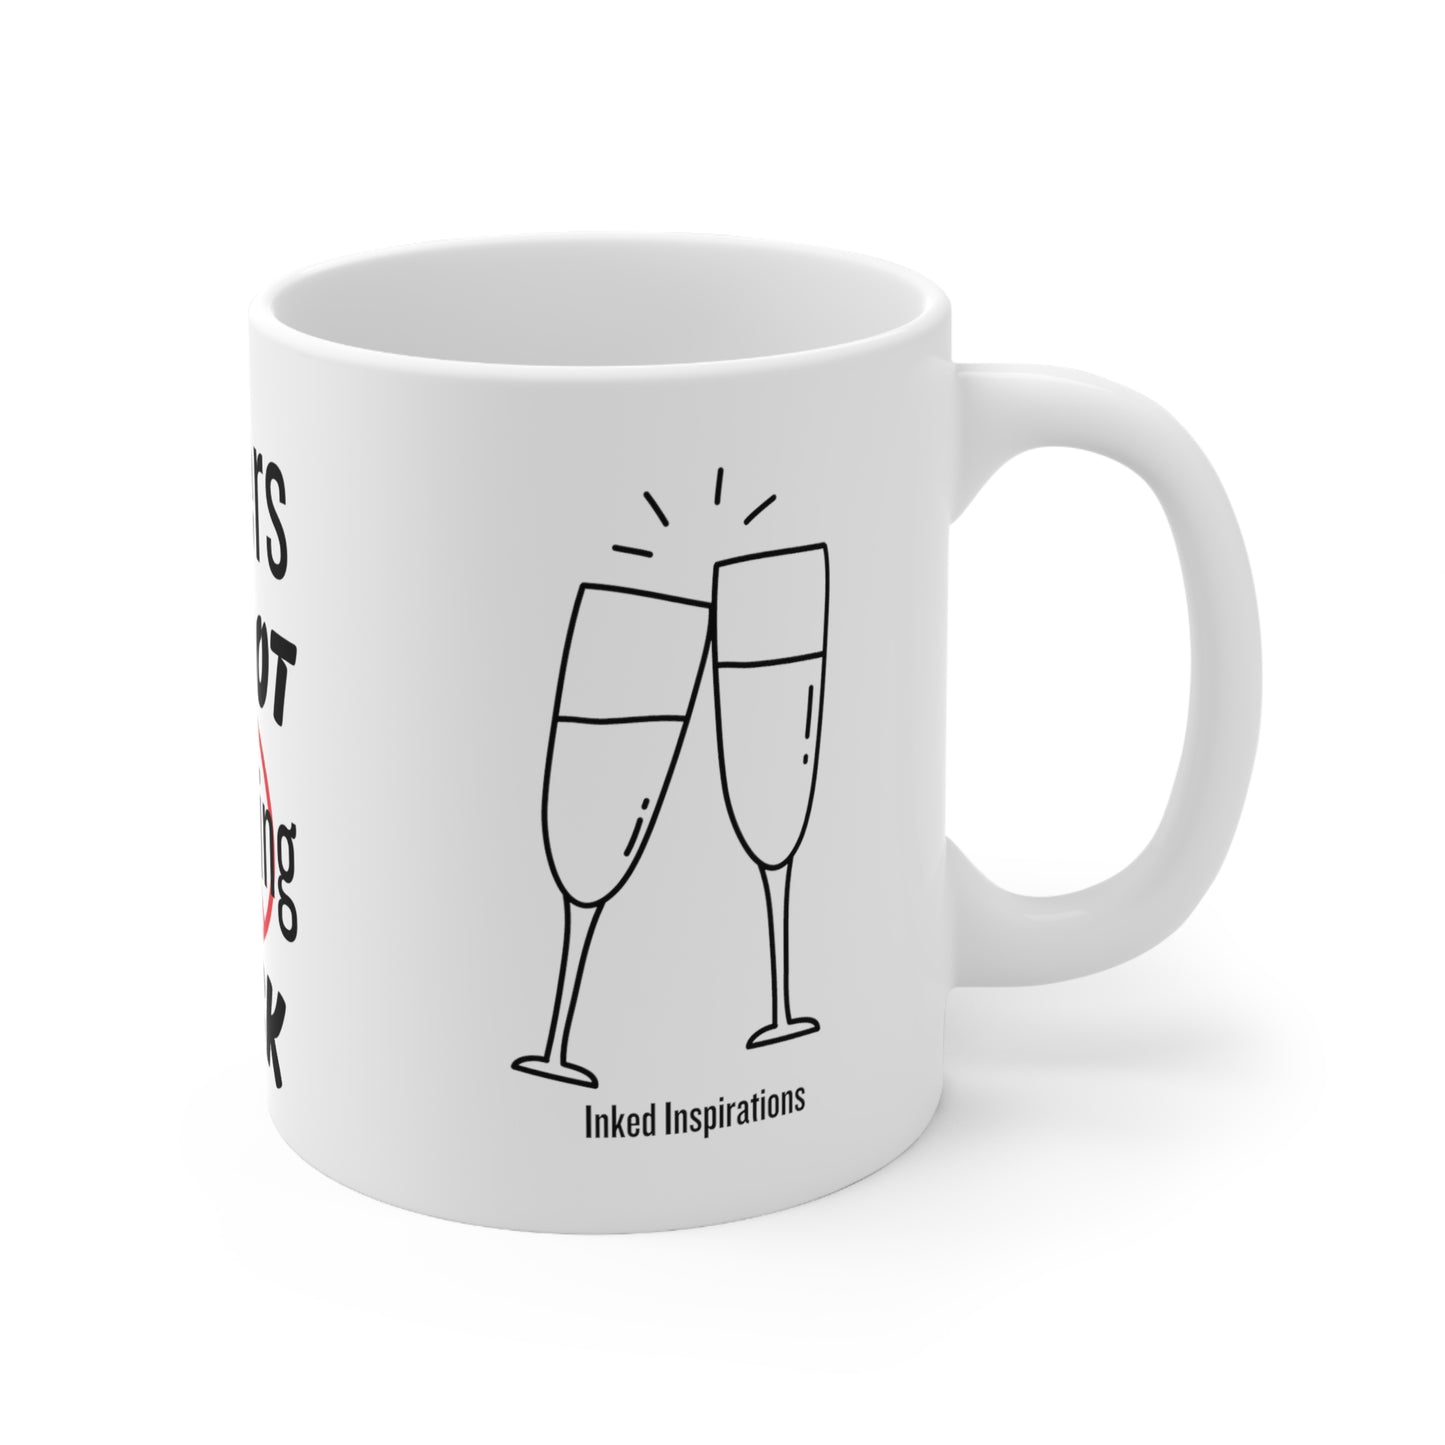 Cheers to NOT doubling Back! Ceramic Mug 11oz